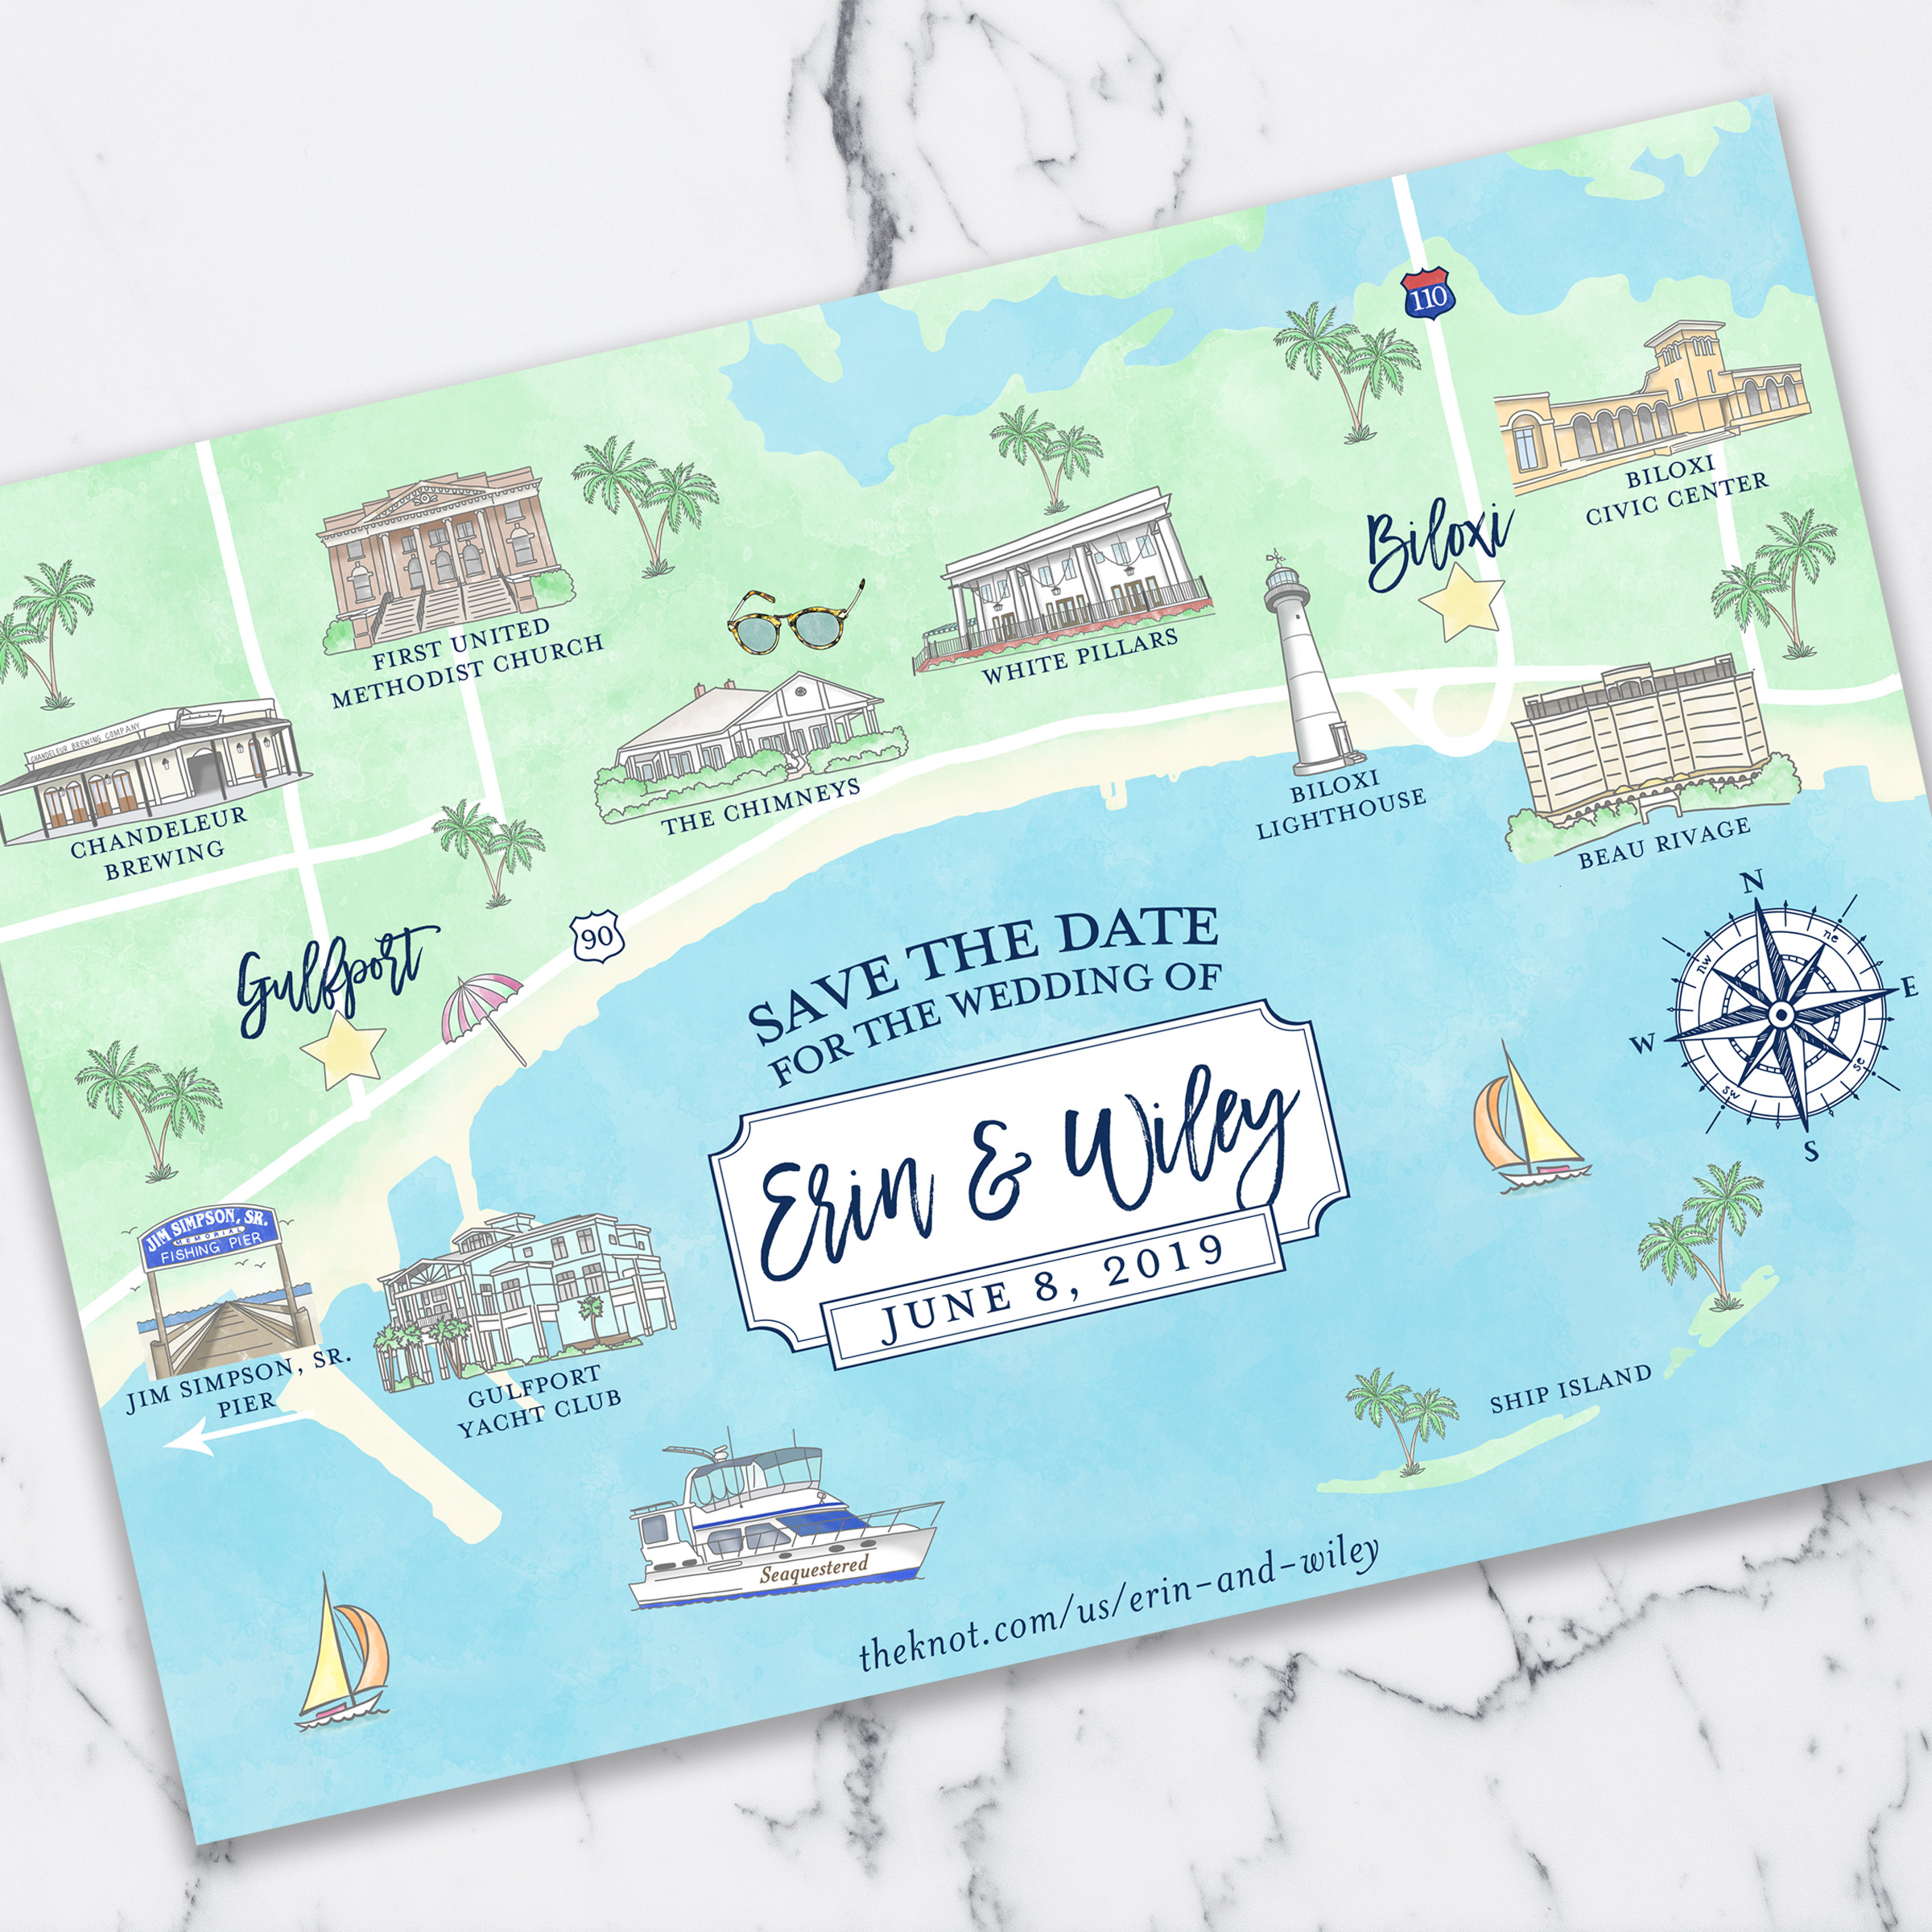 Erin Simpson - Save the Date (small).jpg